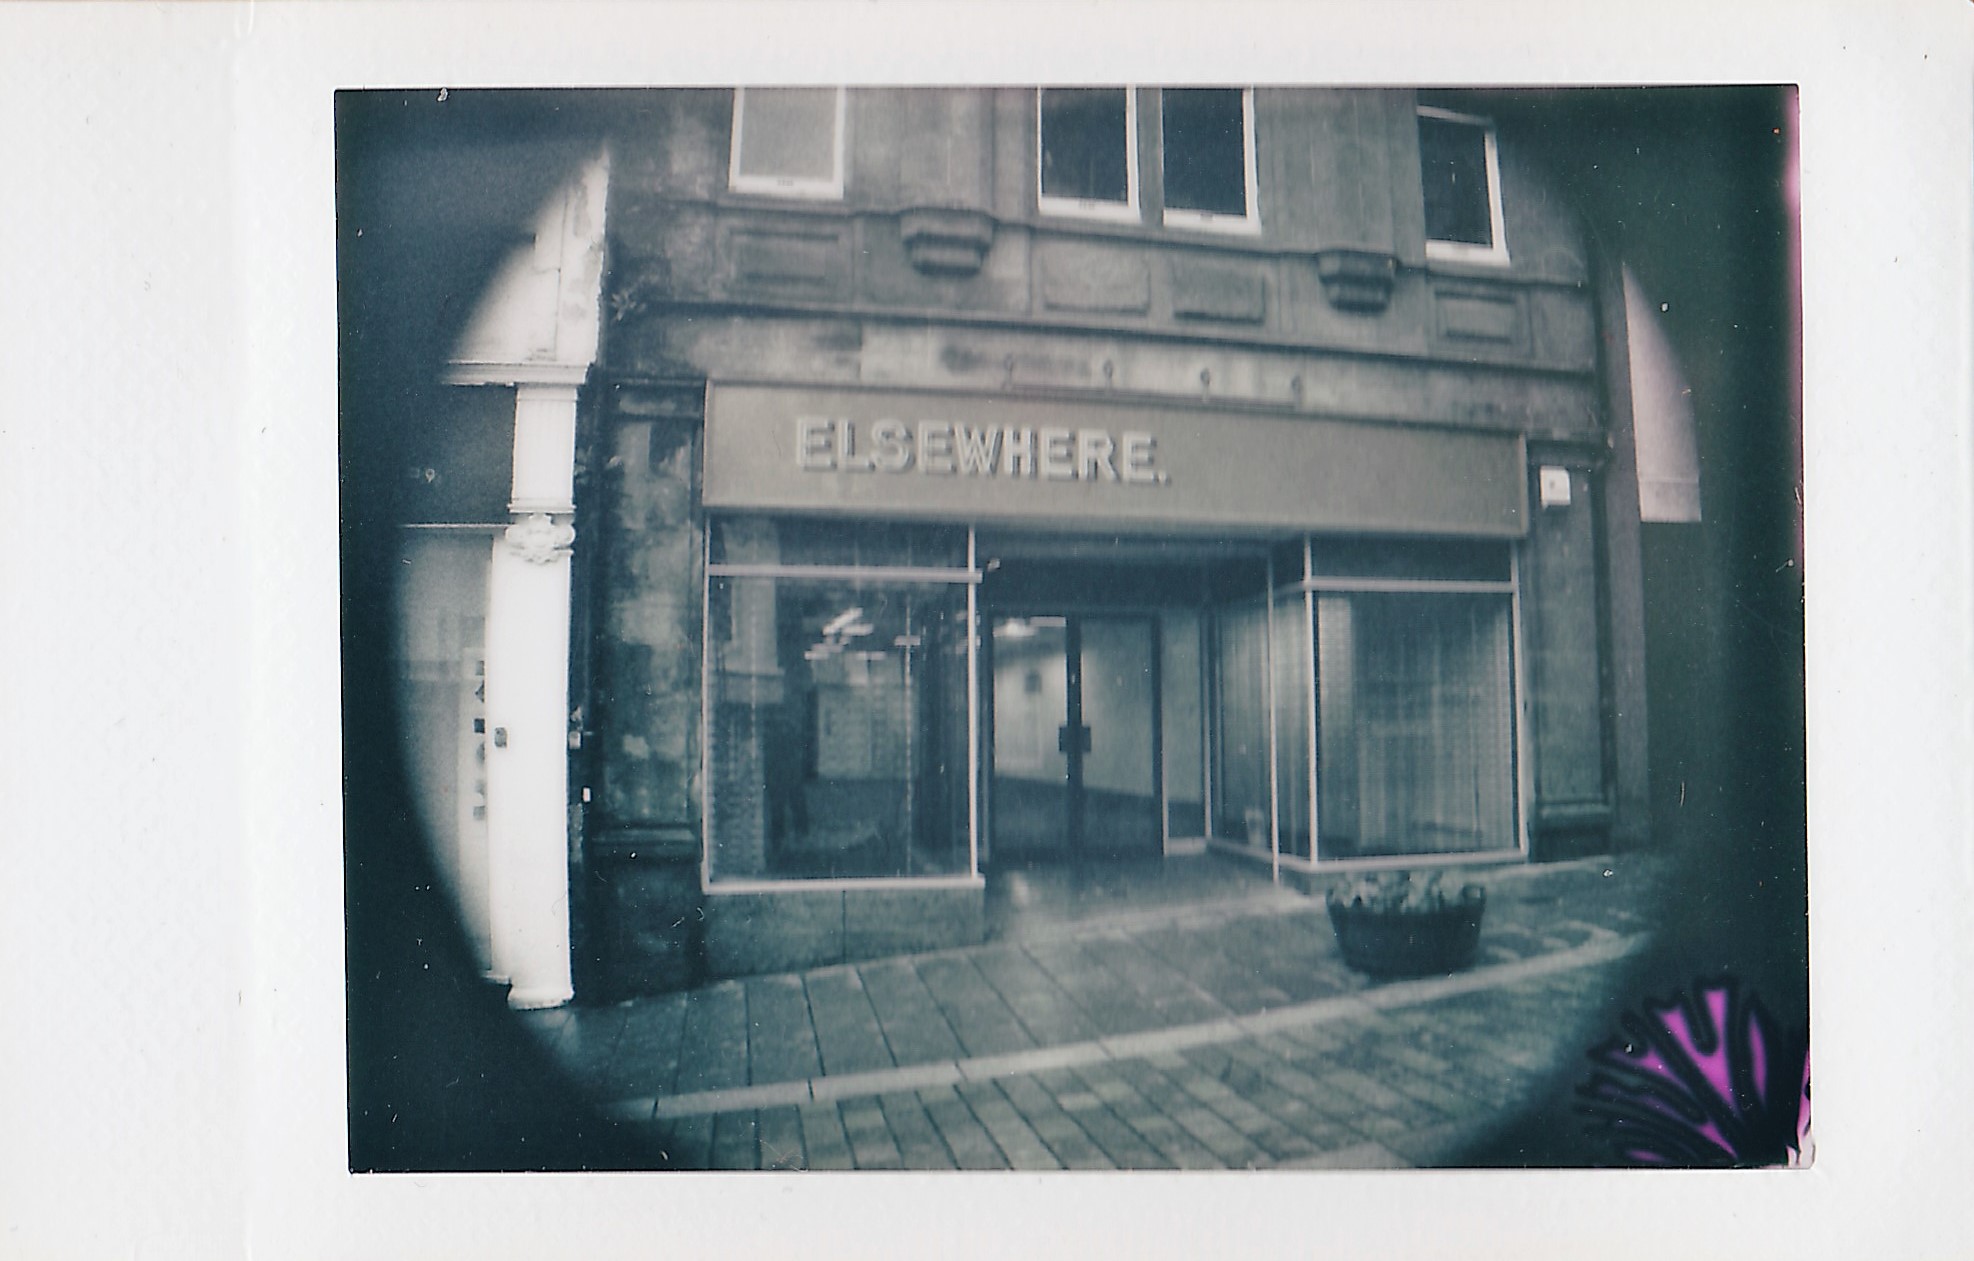 Elsewhere. Nons SL42 Mk I with Pentacon 50/1.8